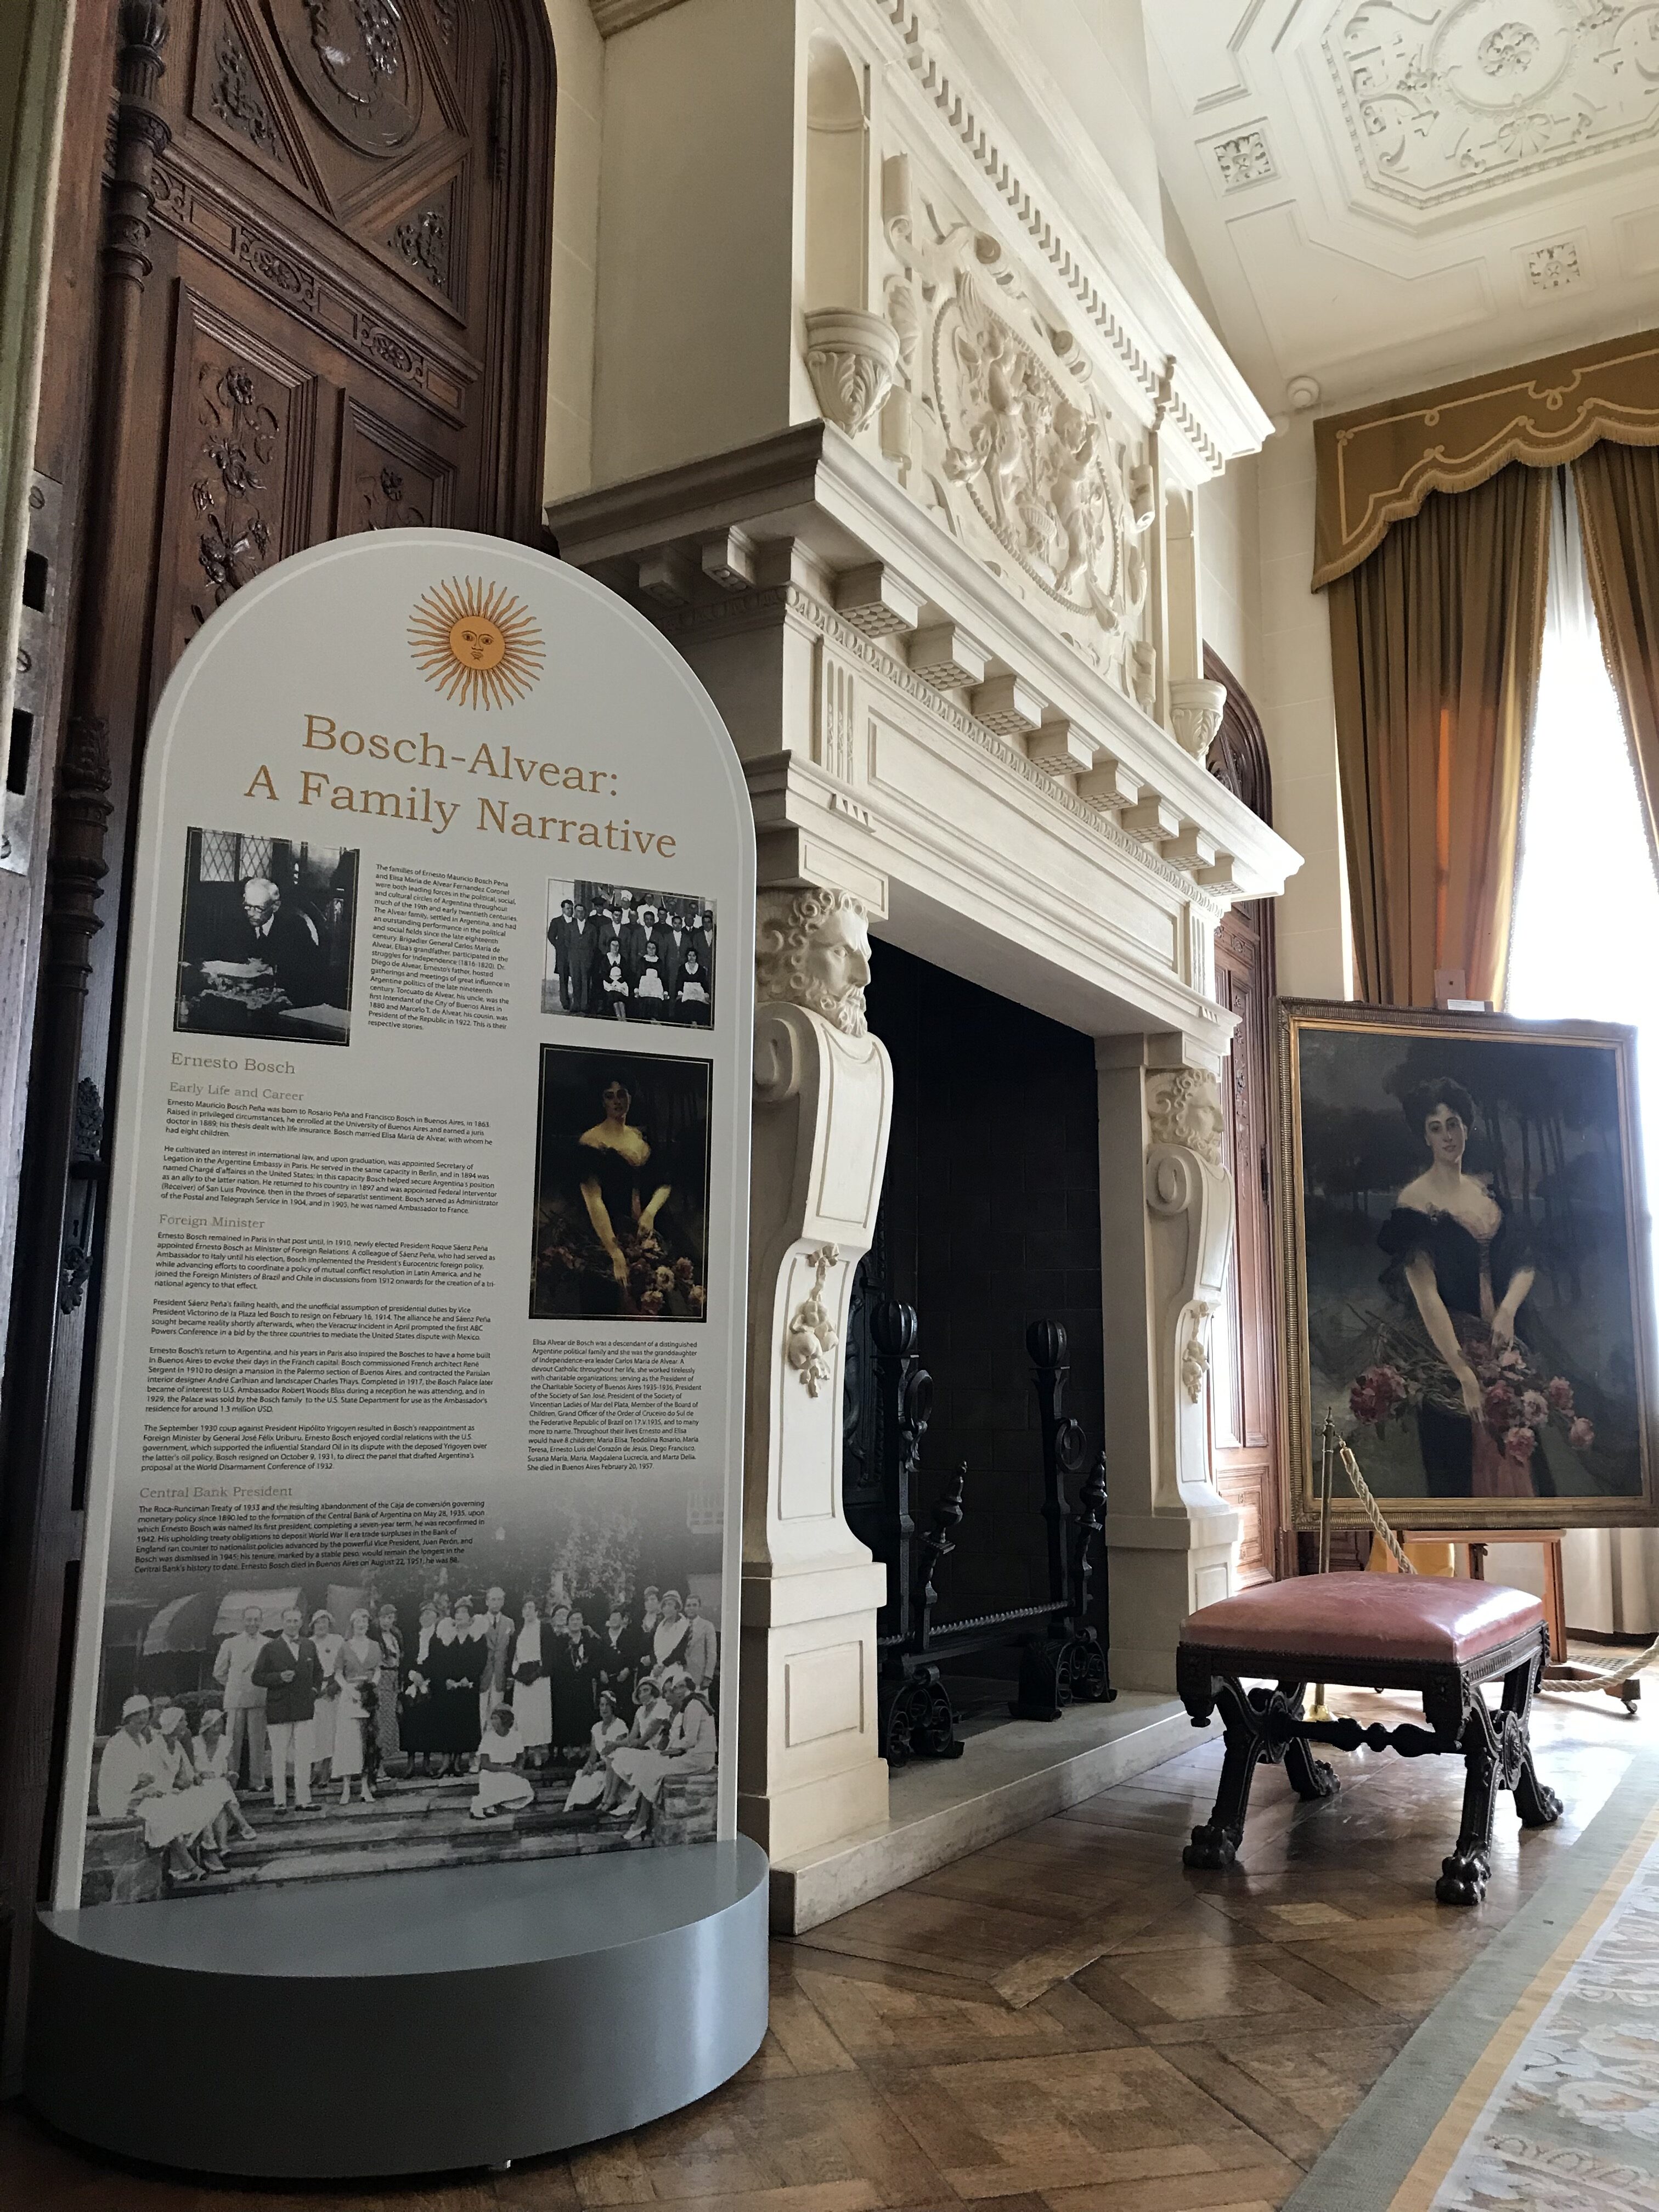 Color photograph, museum display panel and portrait placed to either side of fireplace with decoratively carved surround and overmantel.